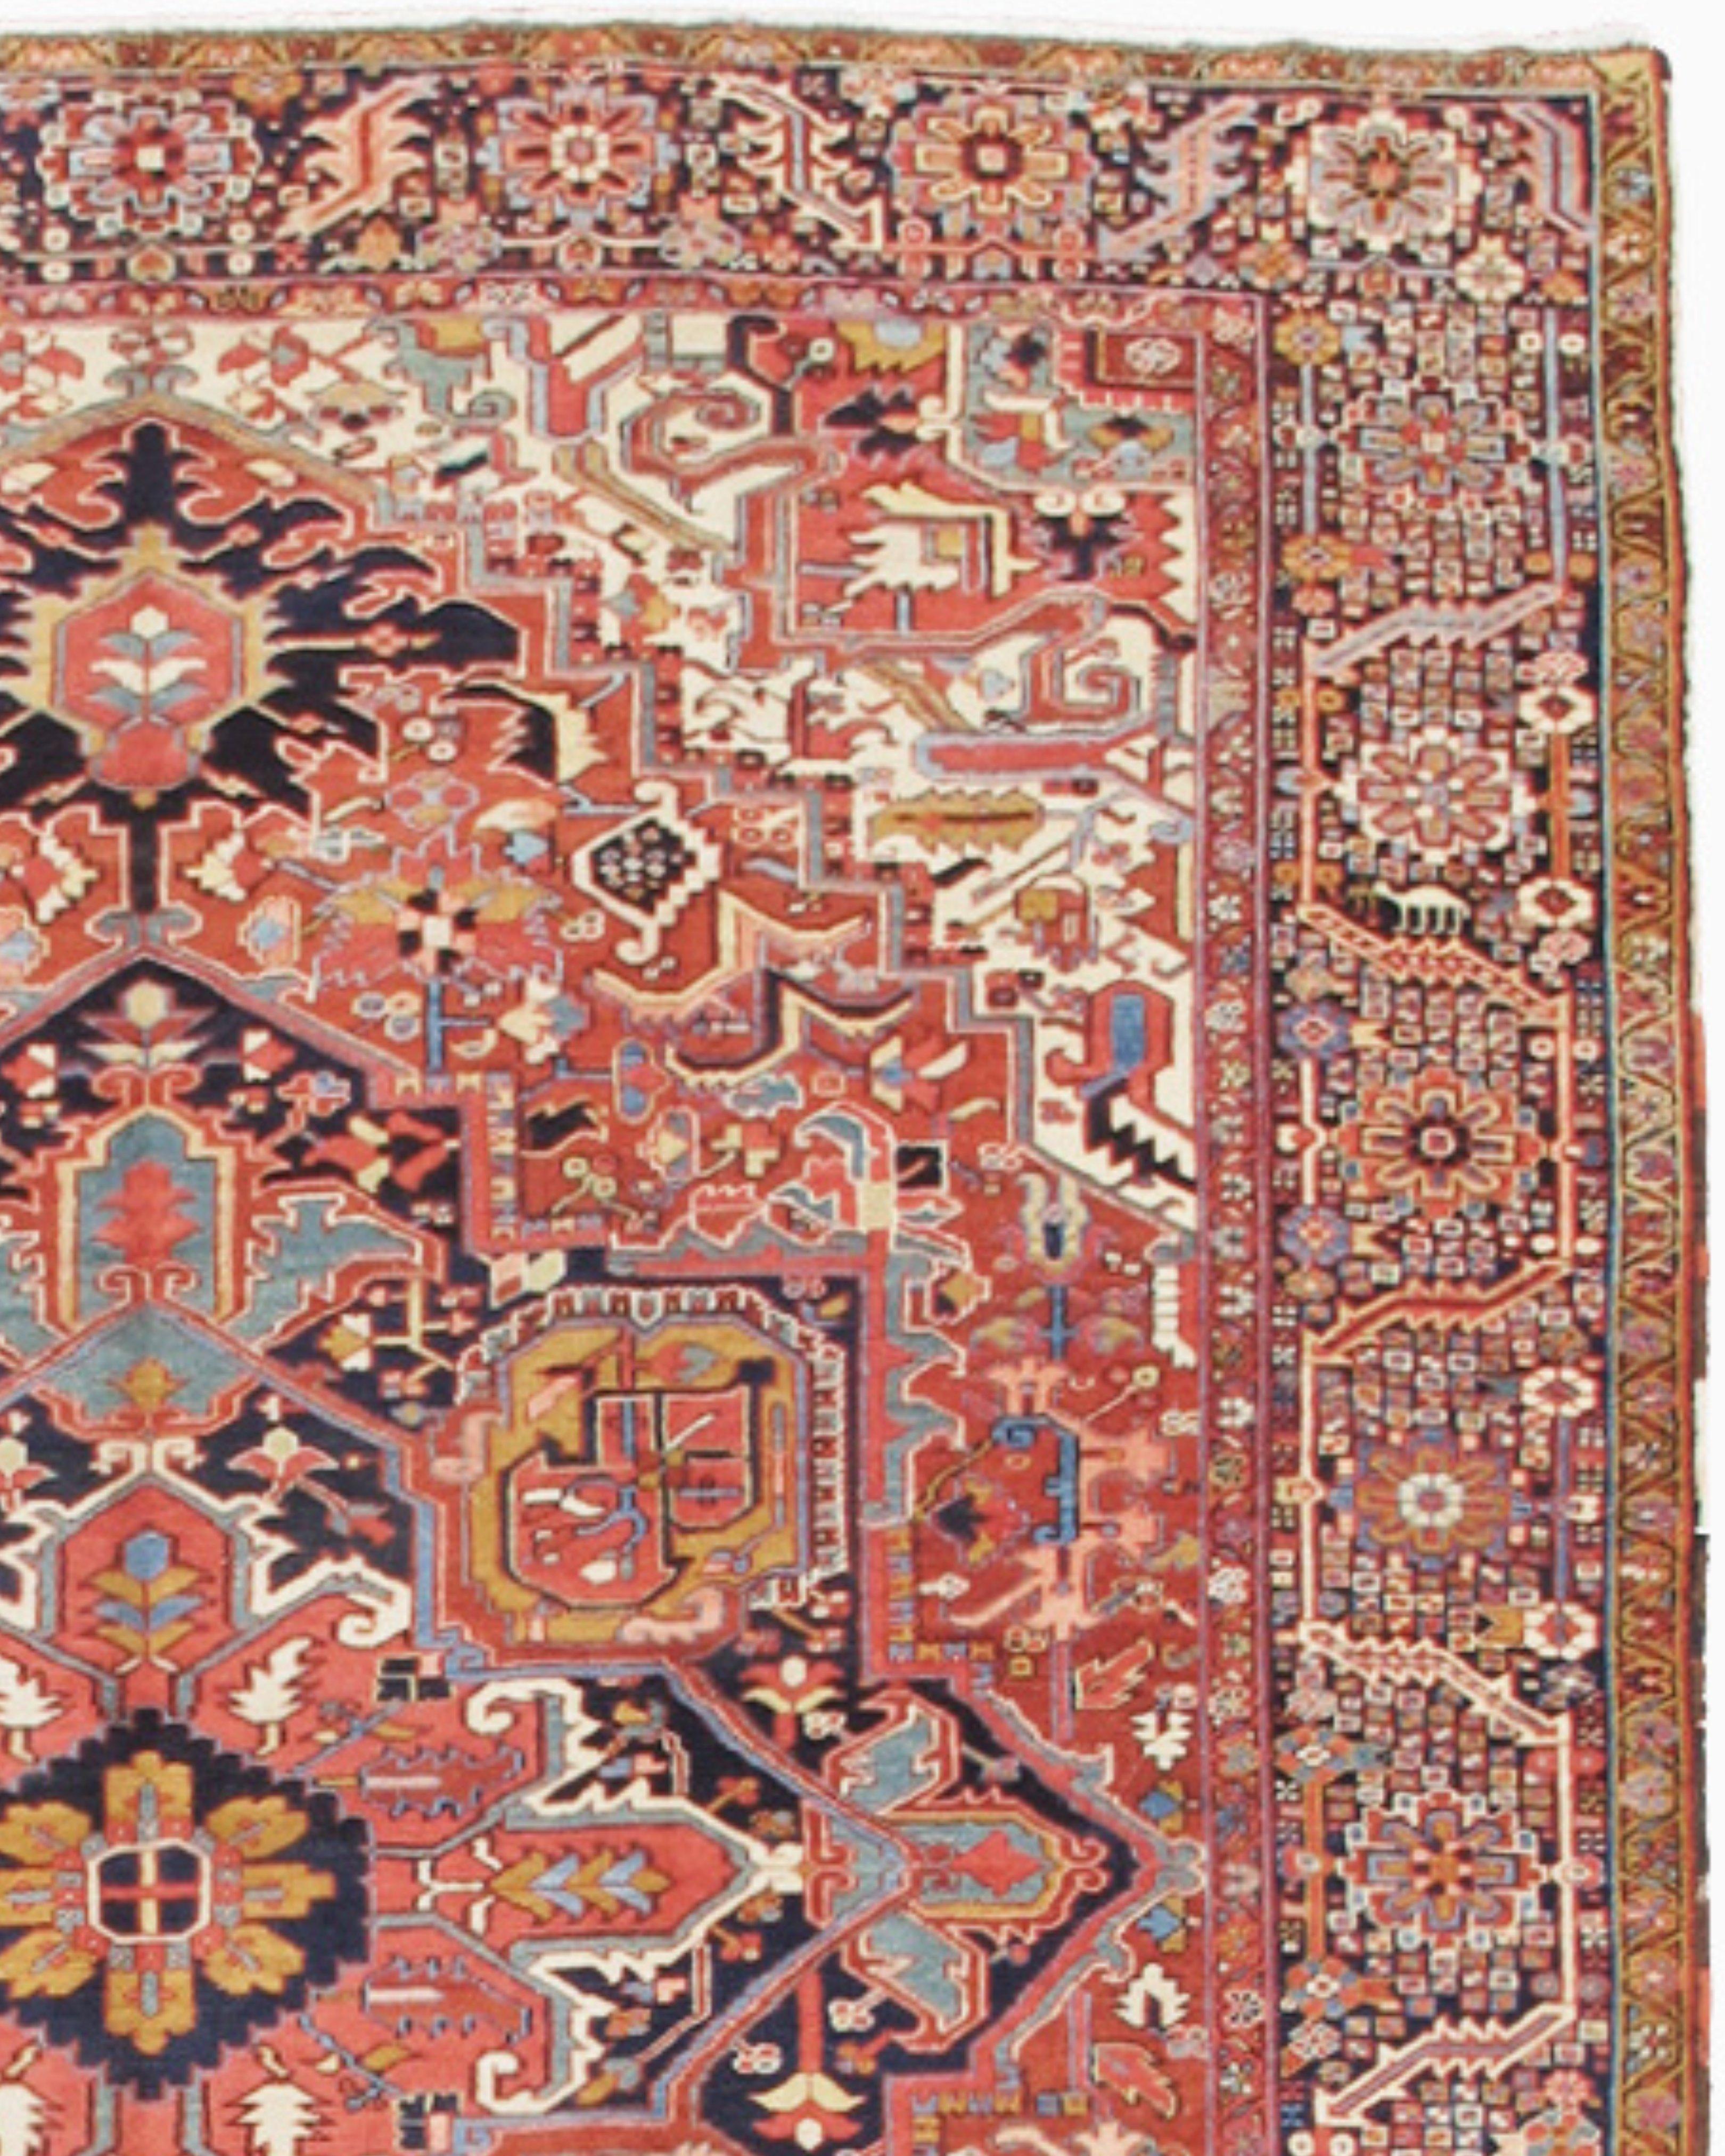 Hand-Knotted Heriz Rug, Early 20th Century